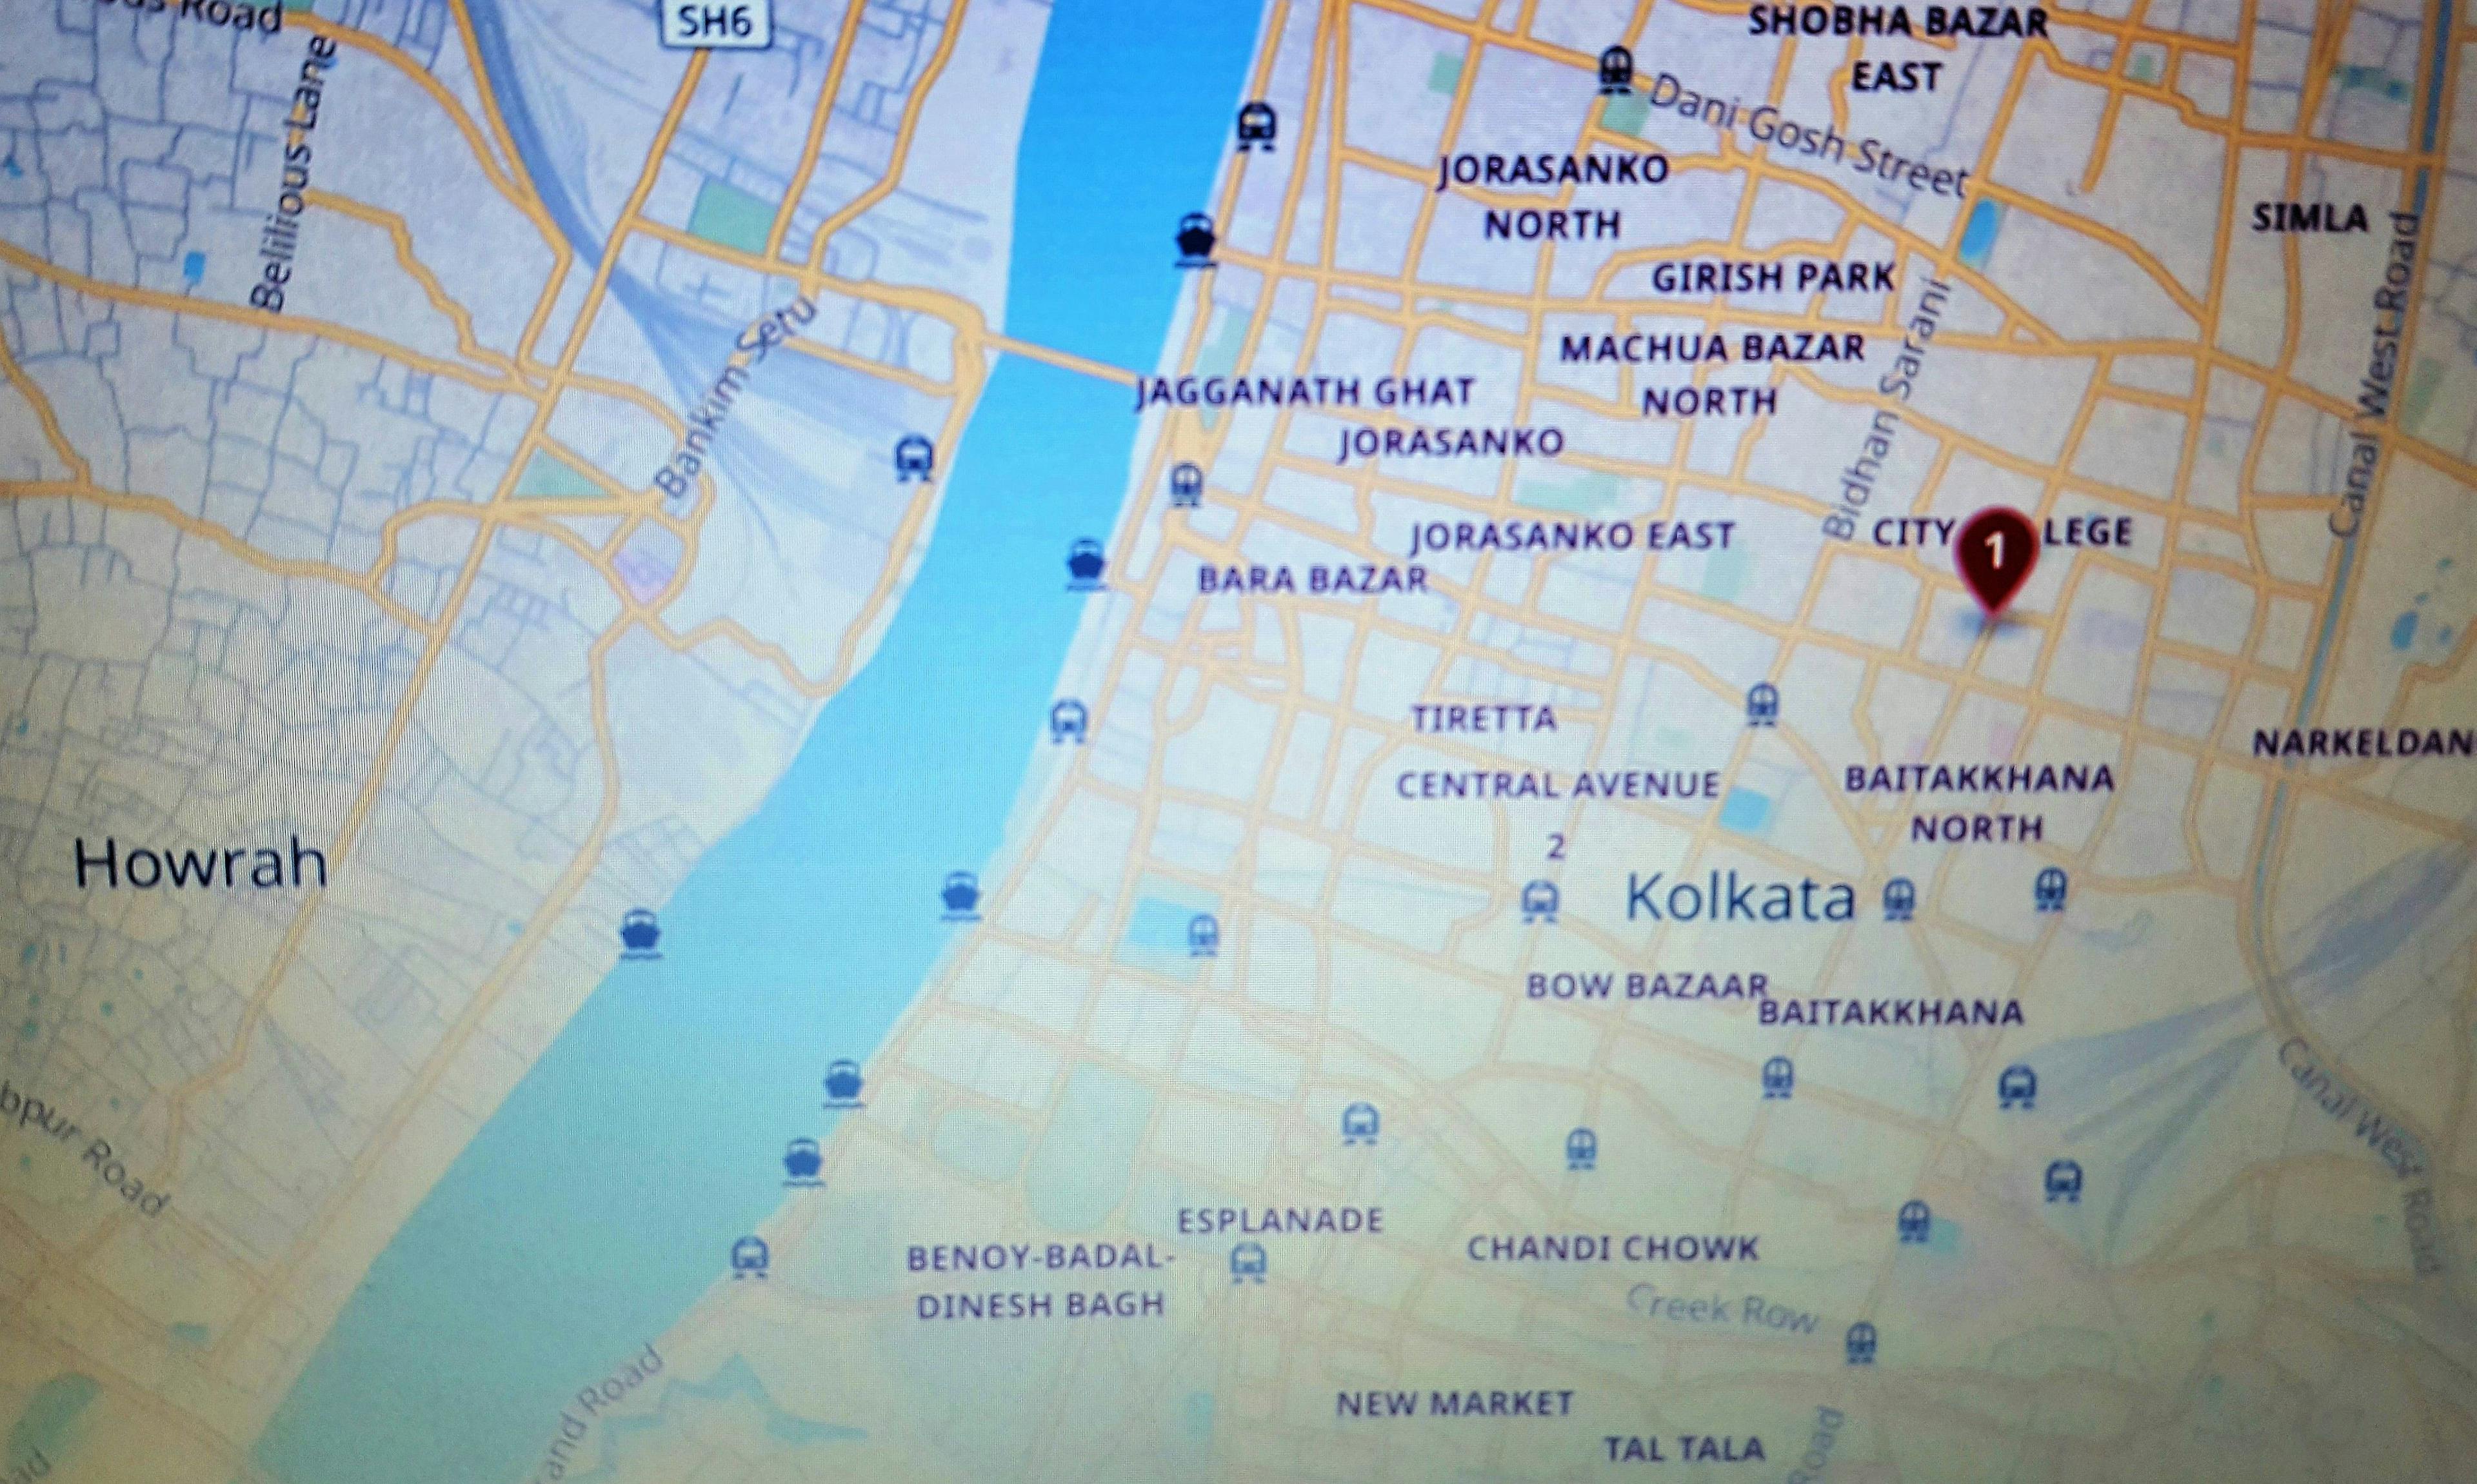 Crime scene related map showing the related areas in today’s perspective. The pointer marks the Amherst Street where Rose Brown’s body was found. South of that is the Baitakkhana (Brown used to live in Mr. Harris’ compound). To its left is the Bow Bazar (Madhub Chander’s shop) and way further left across the river in Howrah is where Kingsley used to live. 